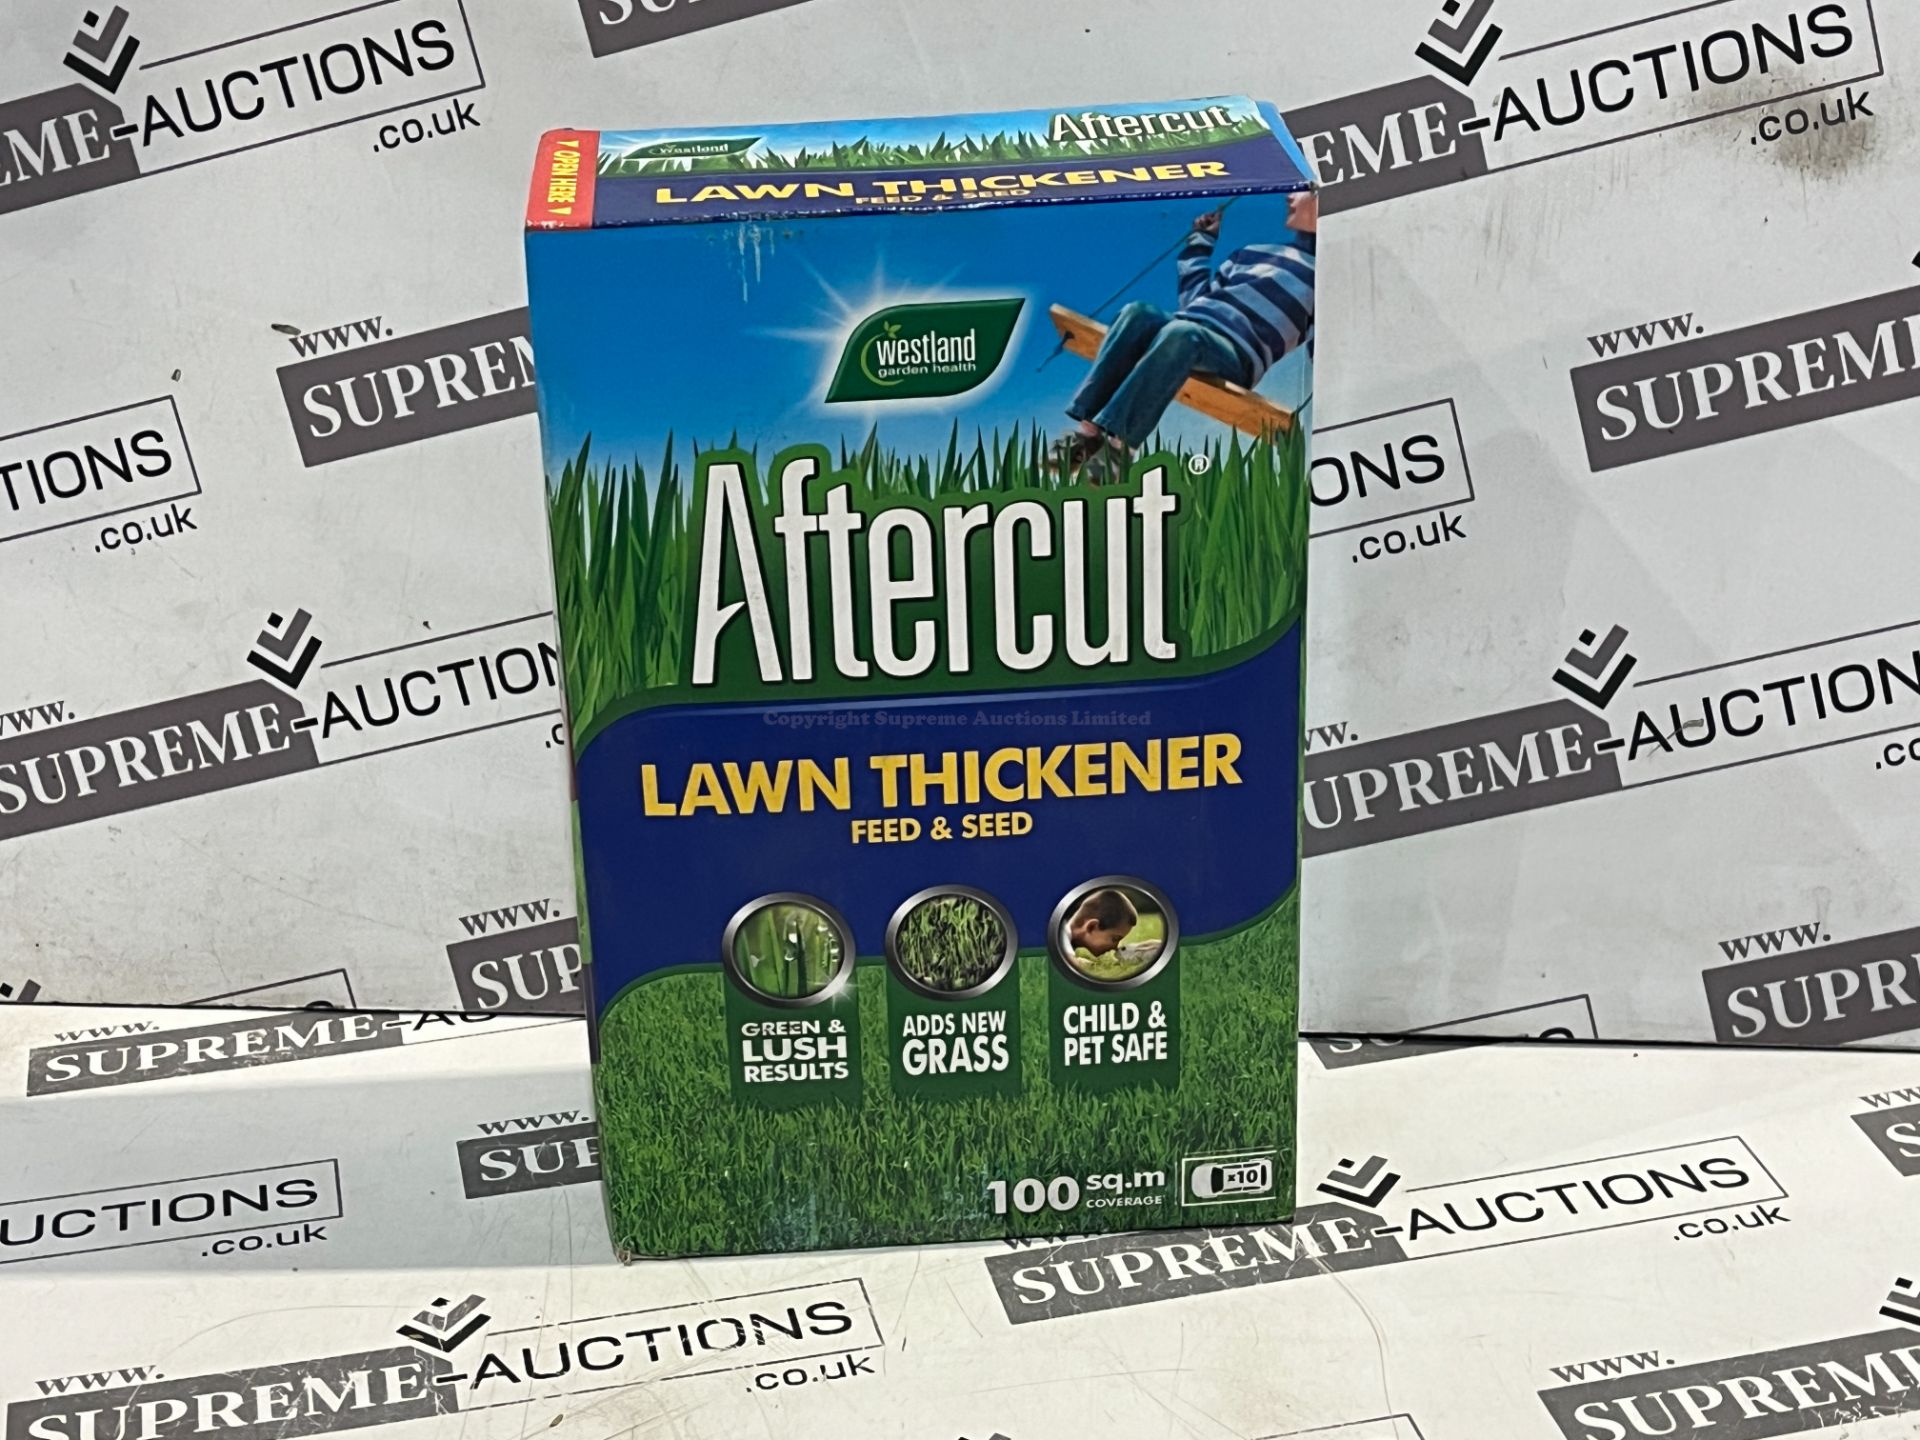 20 X BRAND NEW WESTLAND AFTERCUT LAWN THICKENED 100 SQUARE METER FEED AND SEED R16-5